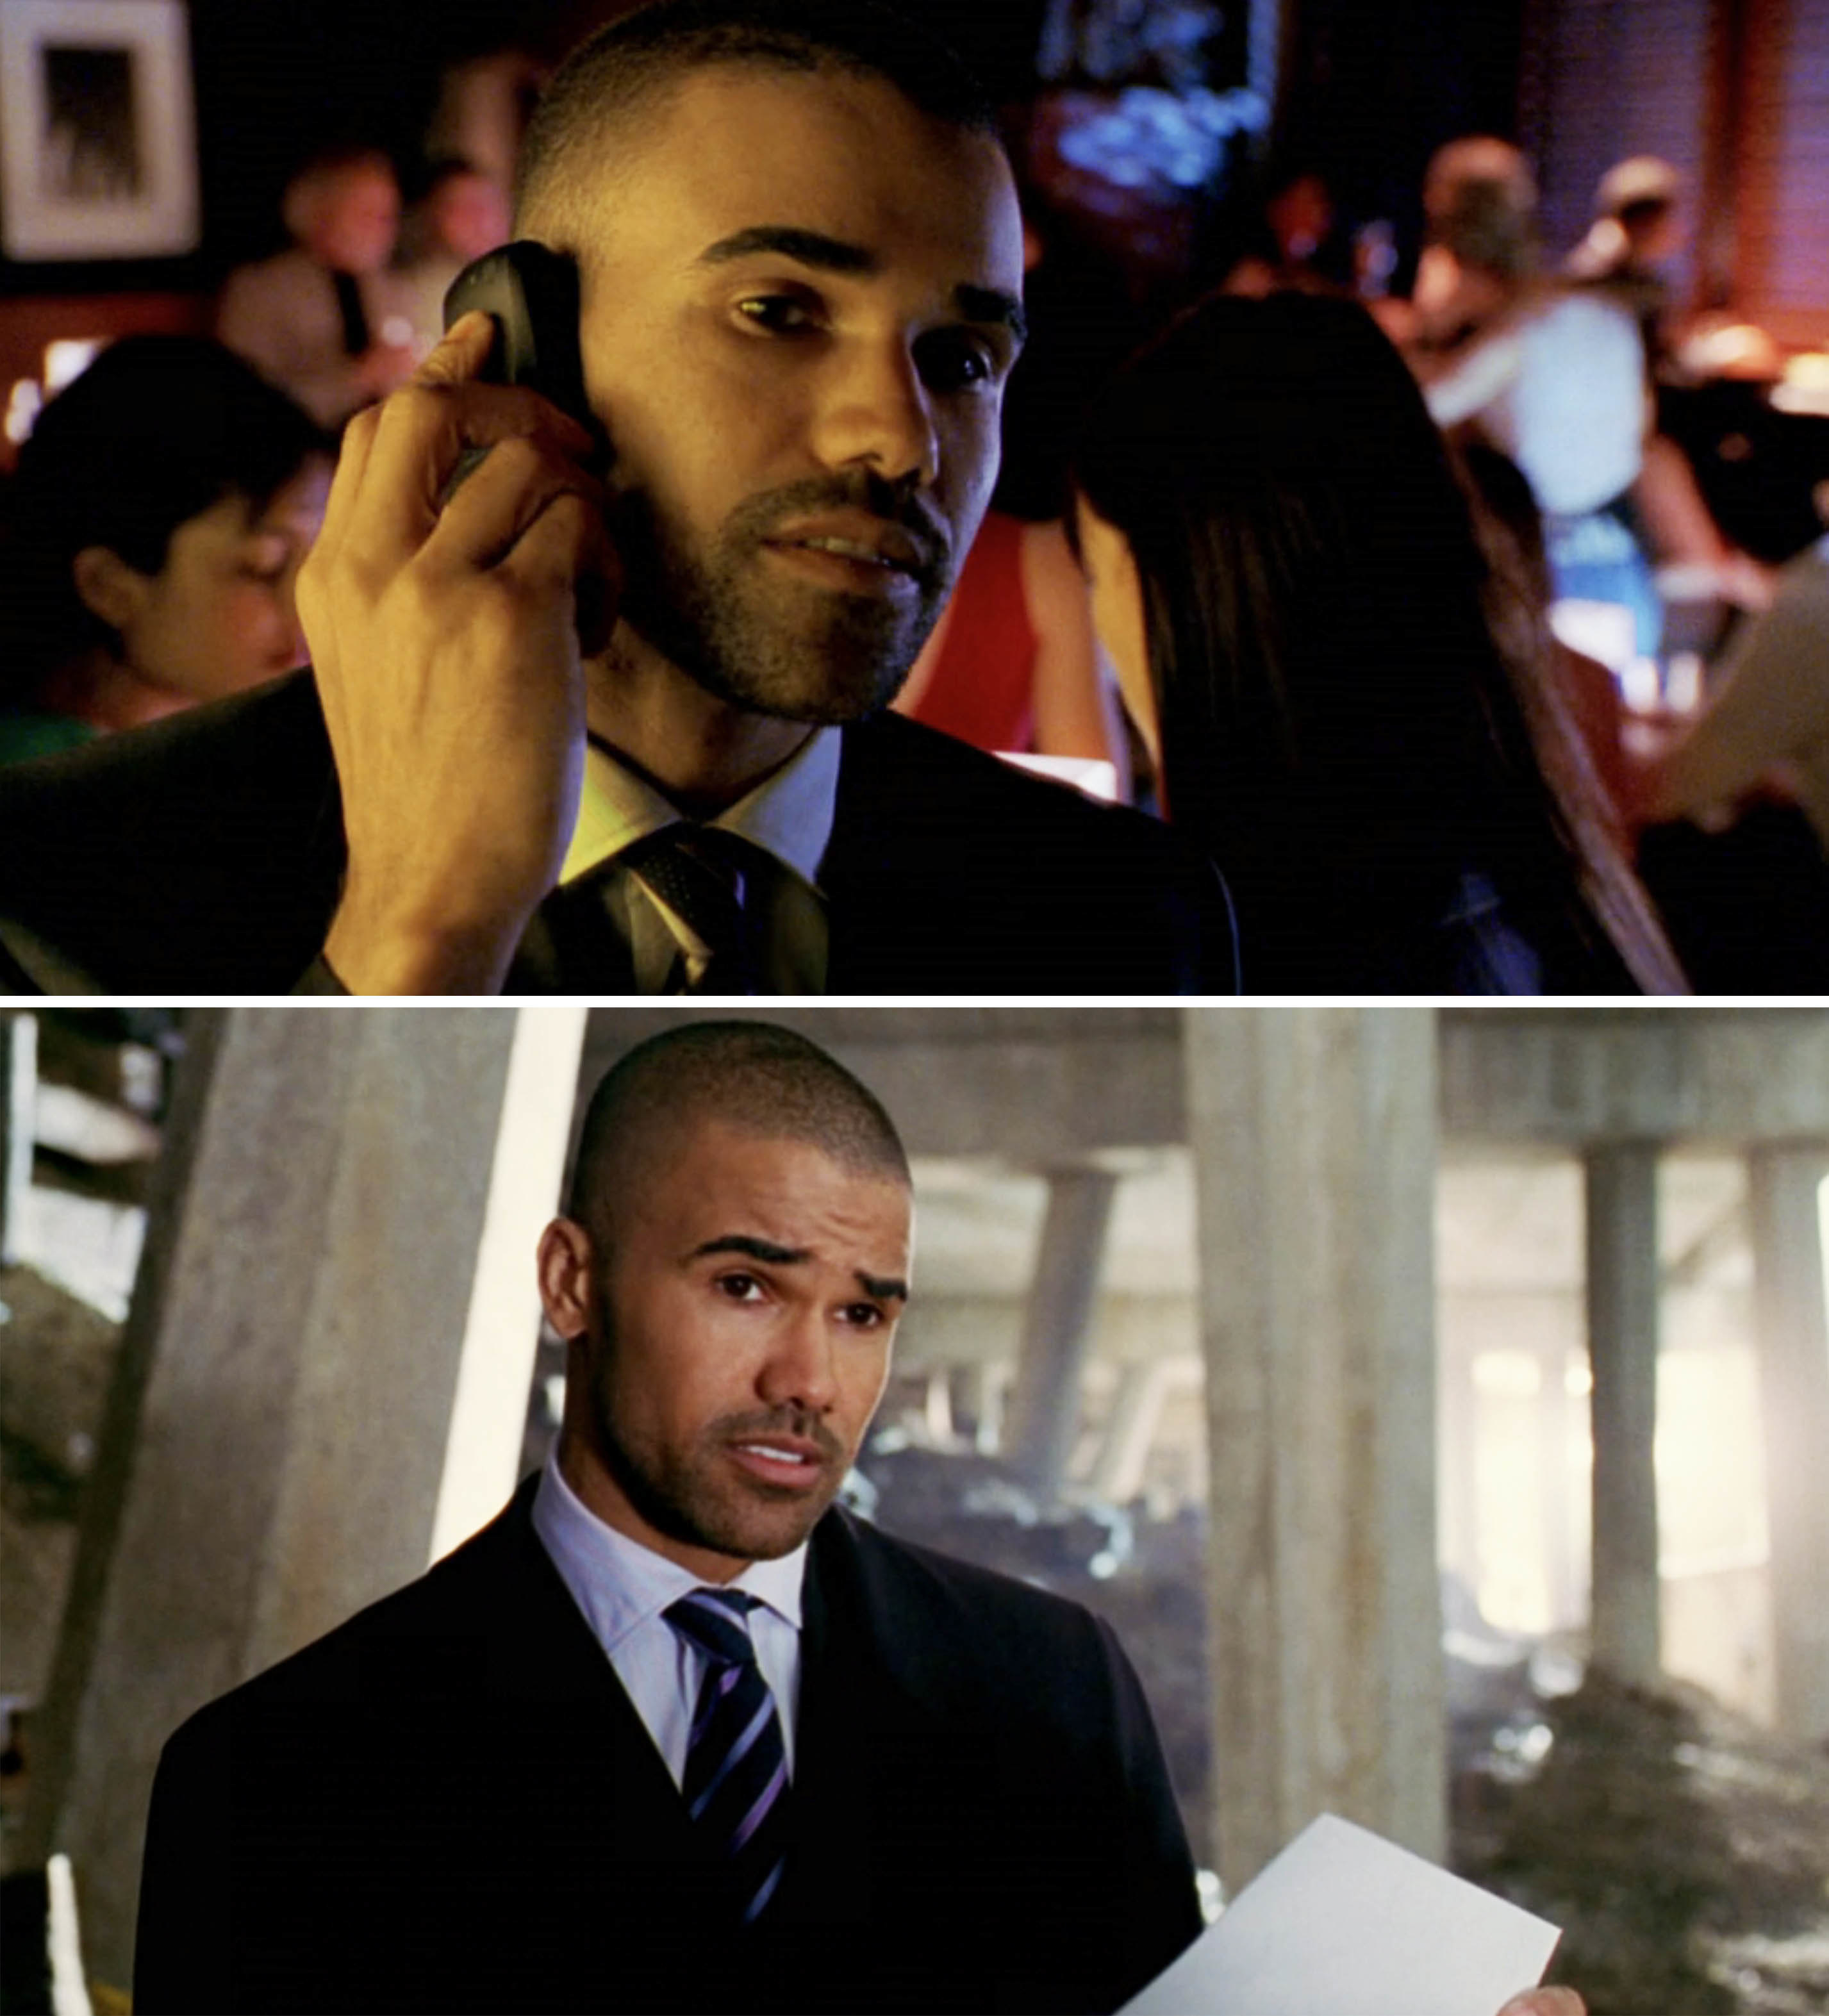 Derek on the phone in a club; Derek with a questioning look on his face and holding a piece of paper